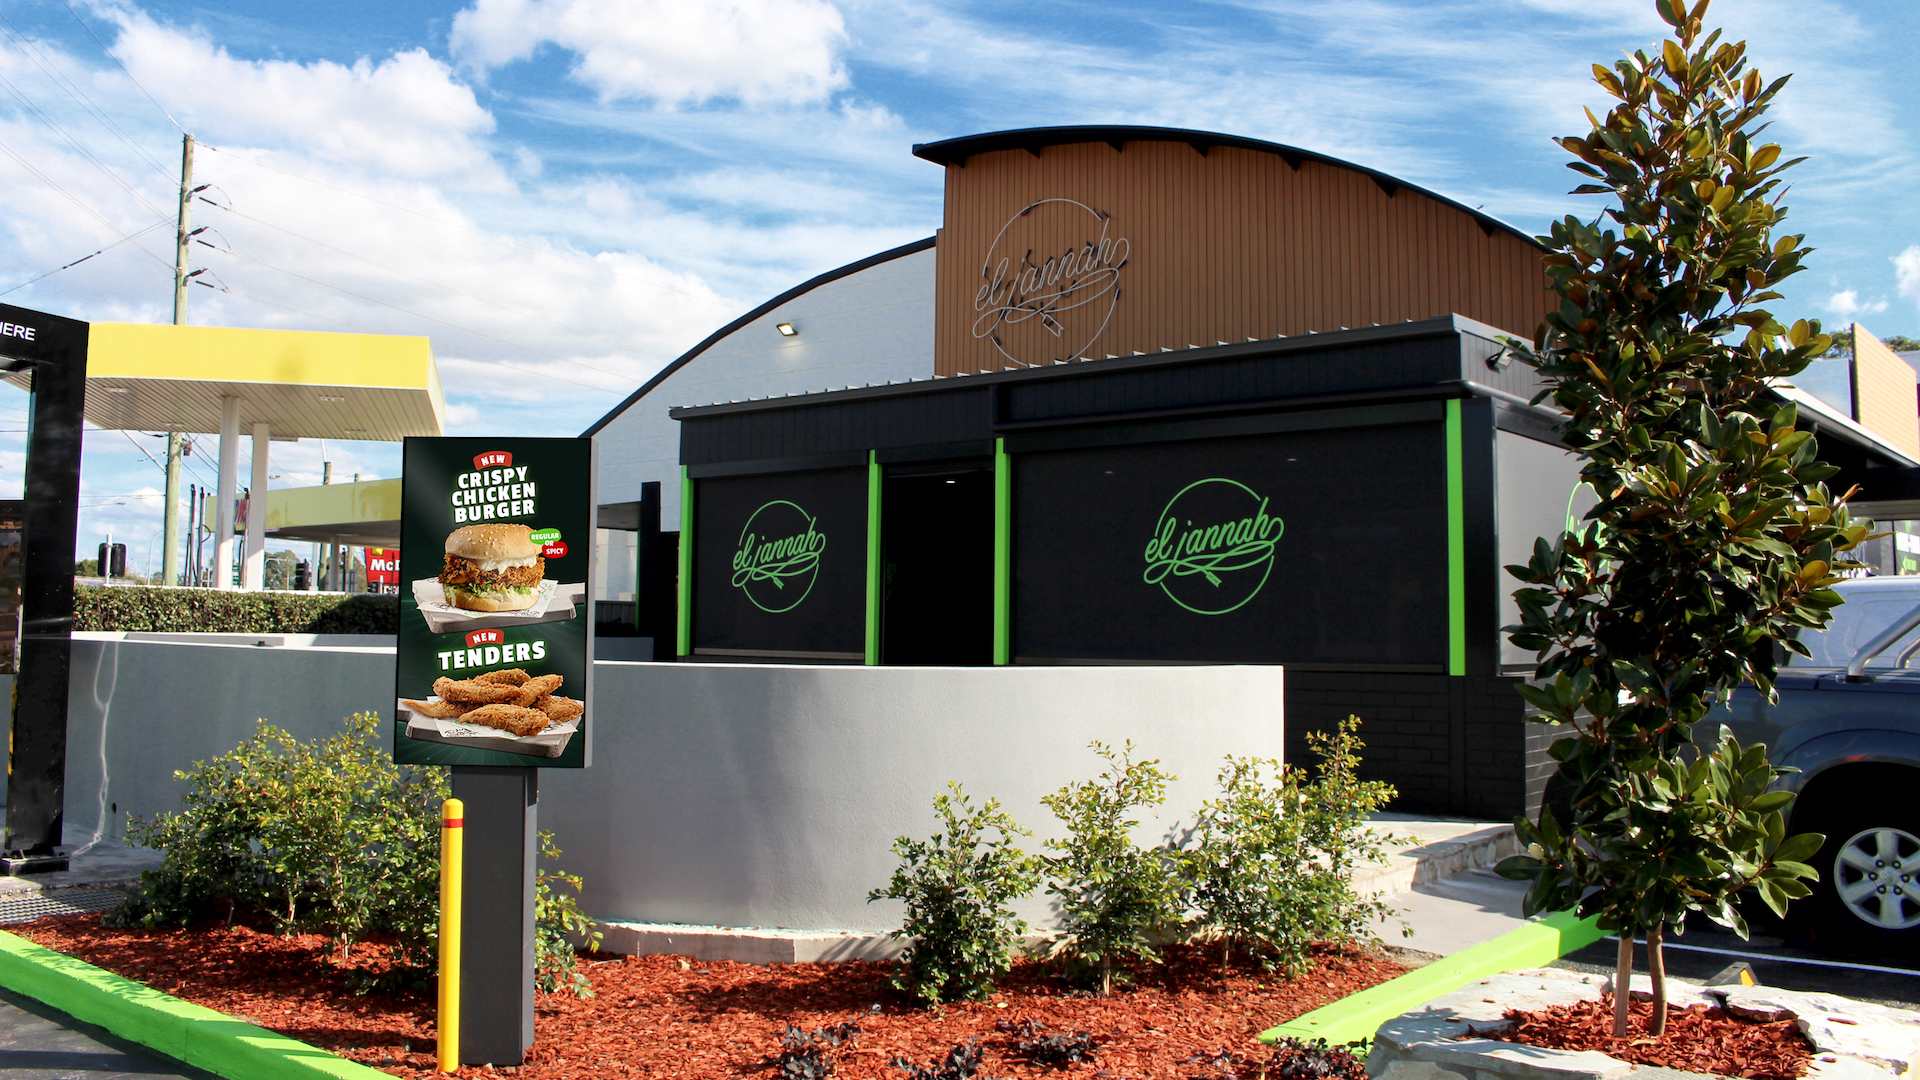 Much-Loved Sydney Charcoal Chicken Chain El Jannah Is Opening Its First Drive-Thru Store